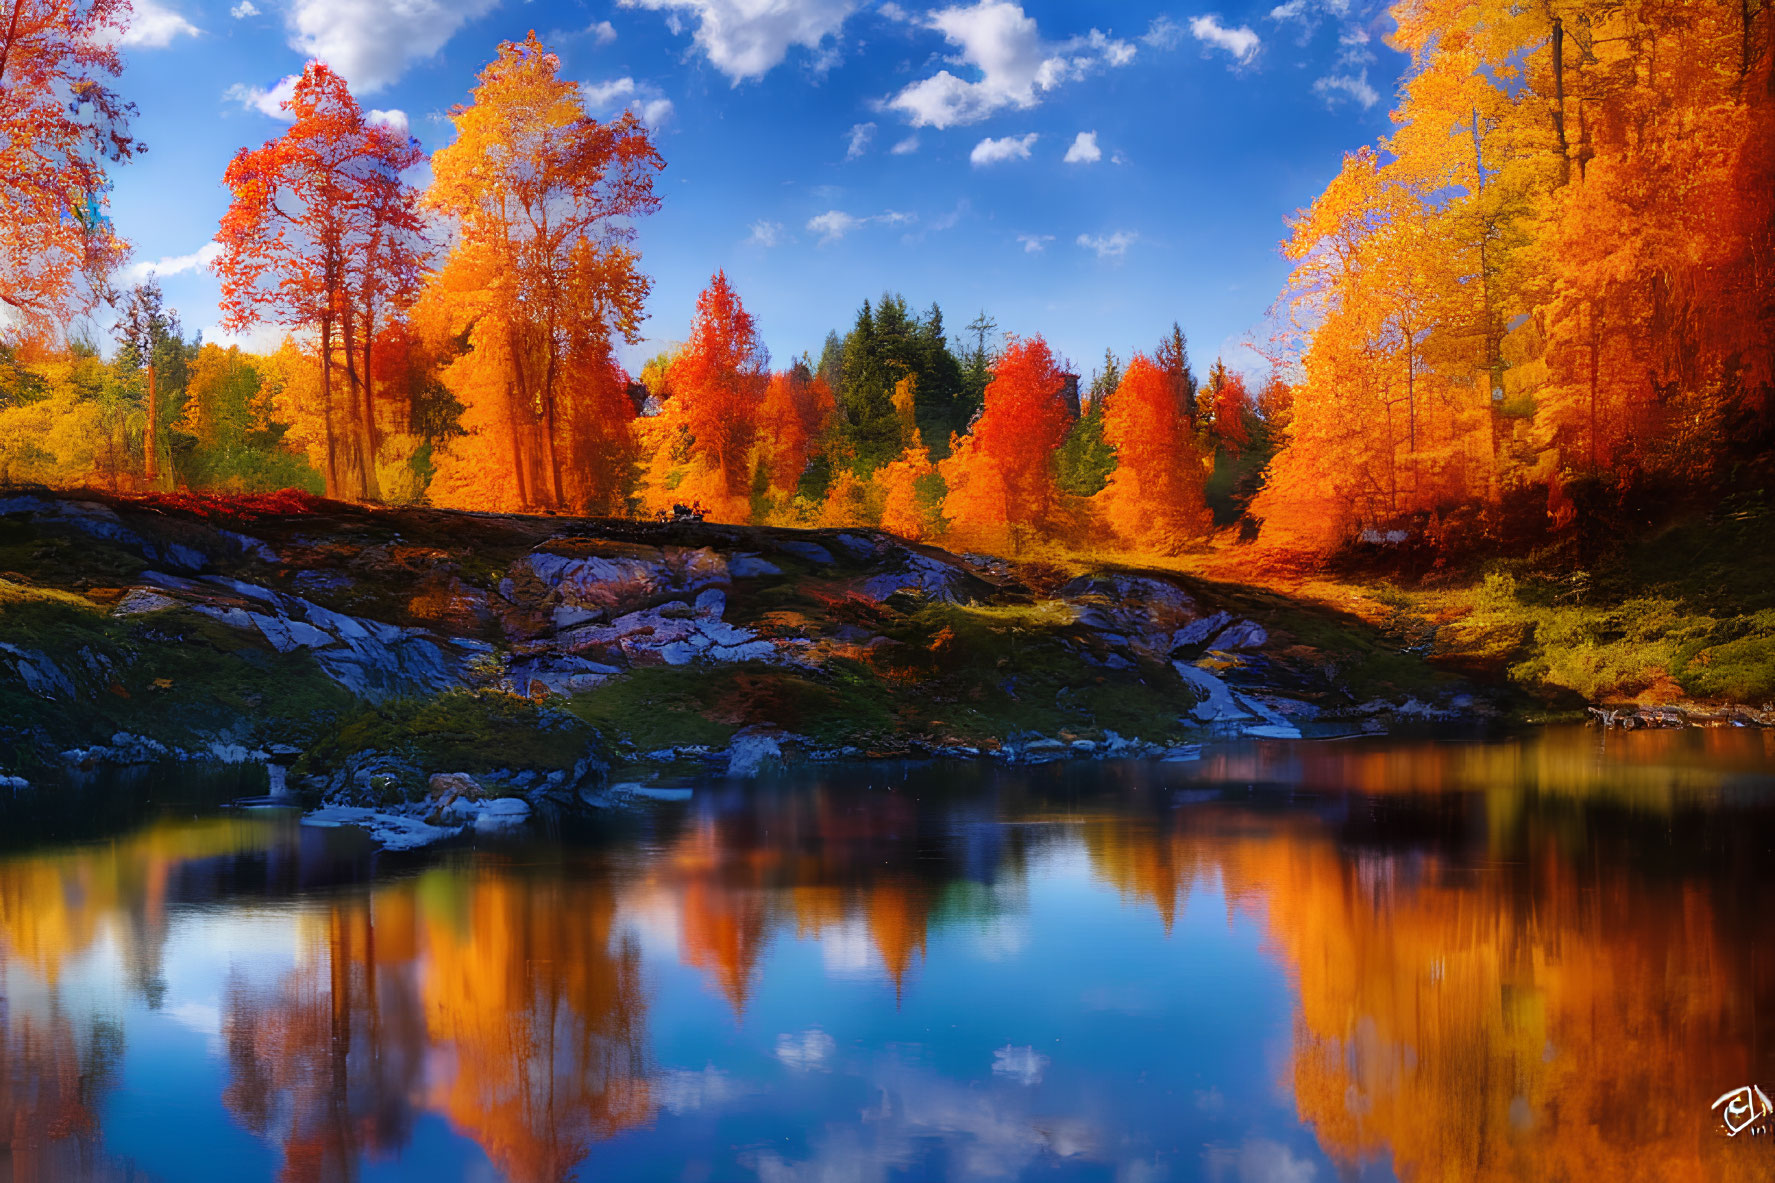 Colorful autumn trees mirrored in serene lake under blue sky with orange leaves and rocky landscape.